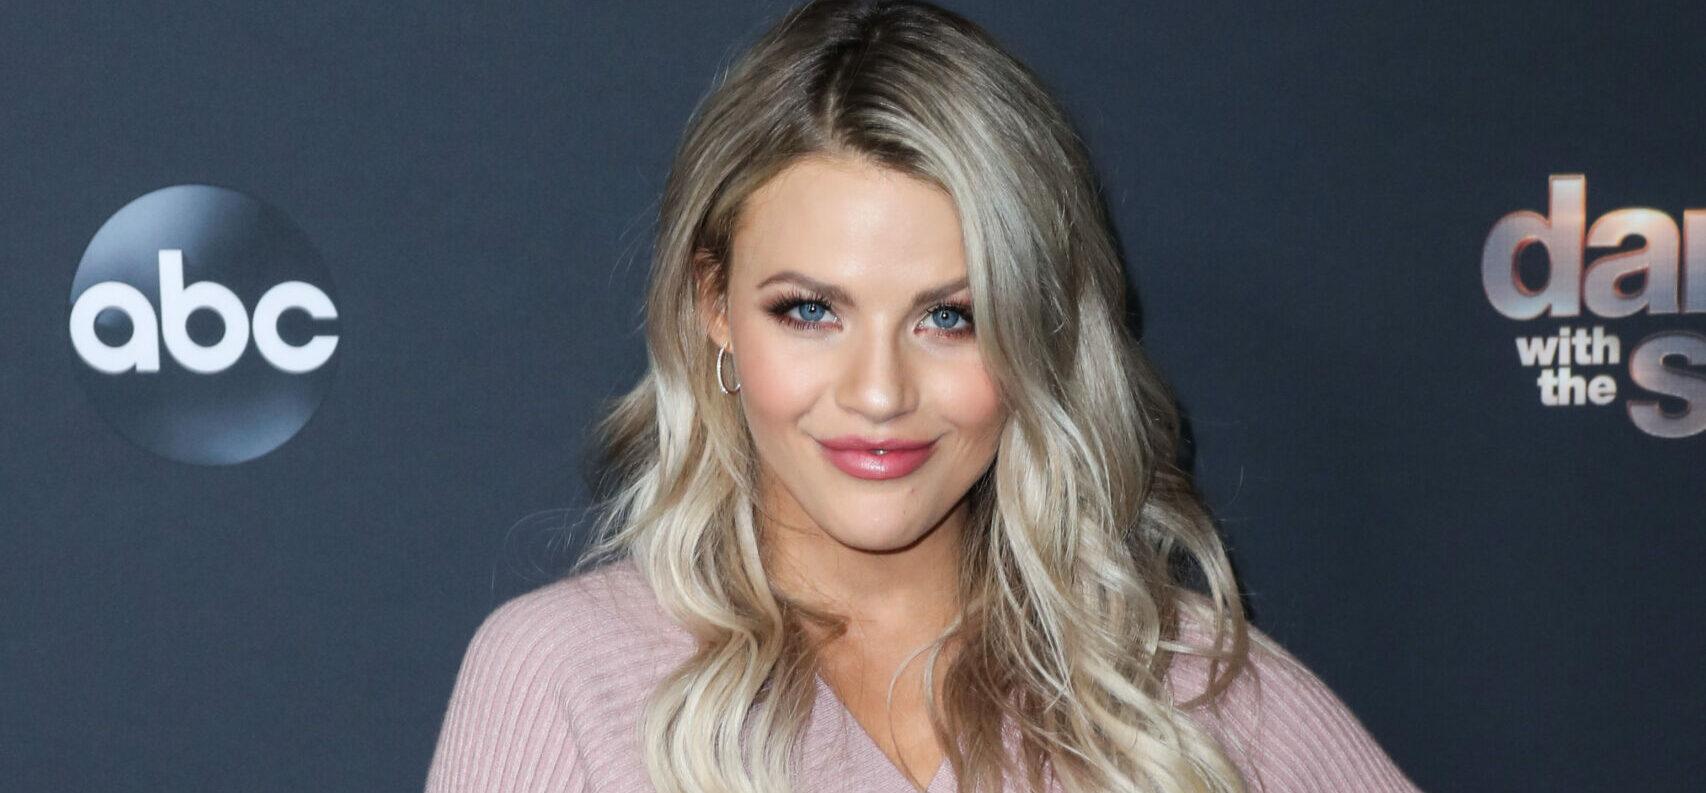 Witney Carson ABC's 'Dancing With The Stars' Season 28 Top Six Finalists Party